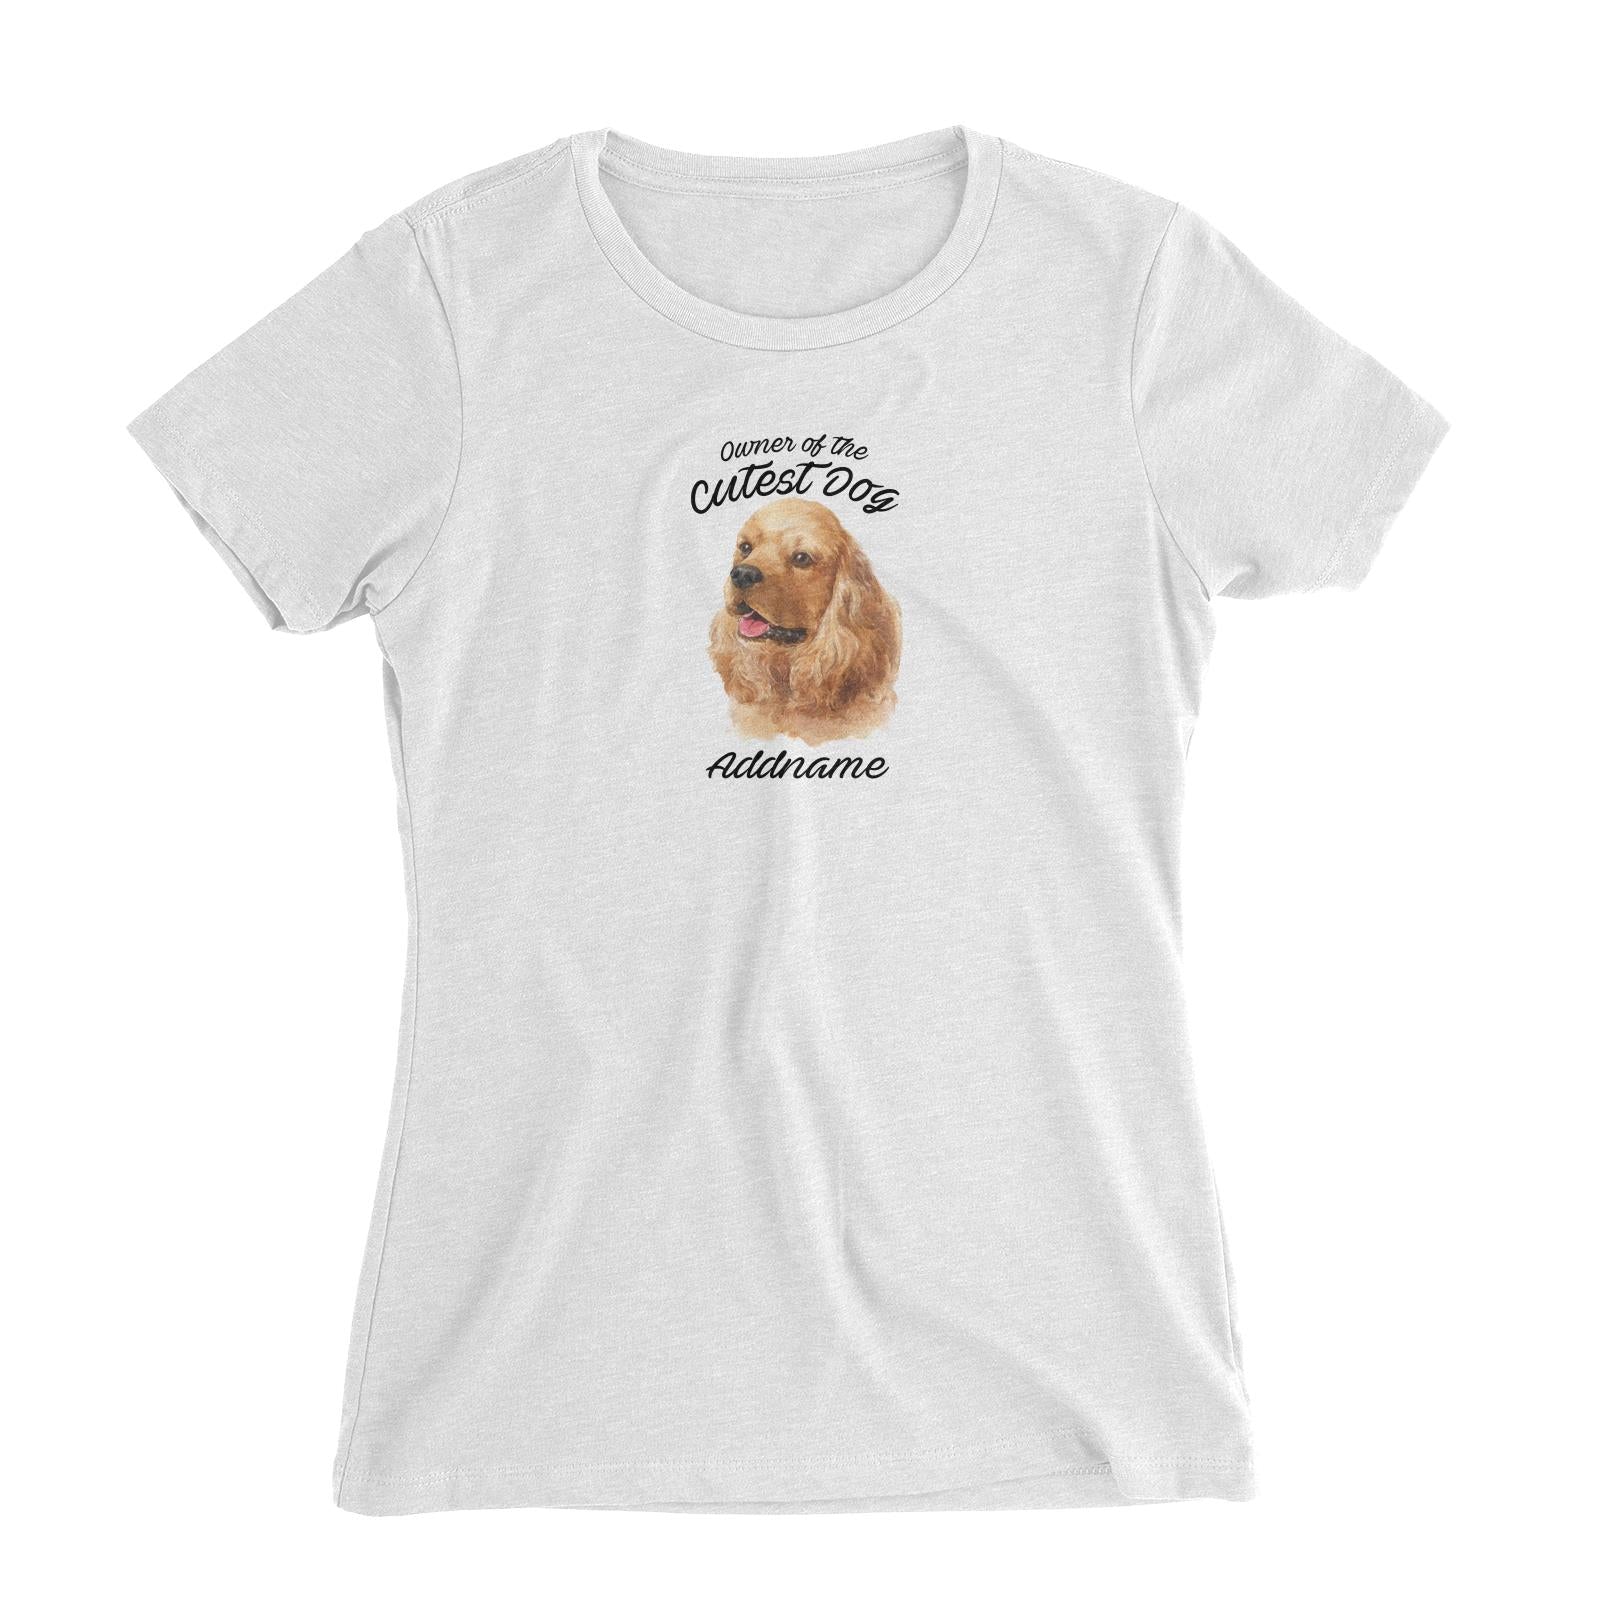 Watercolor Dog Owner Of The Cutest Dog Cocker Spaniel Addname Women's Slim Fit T-Shirt